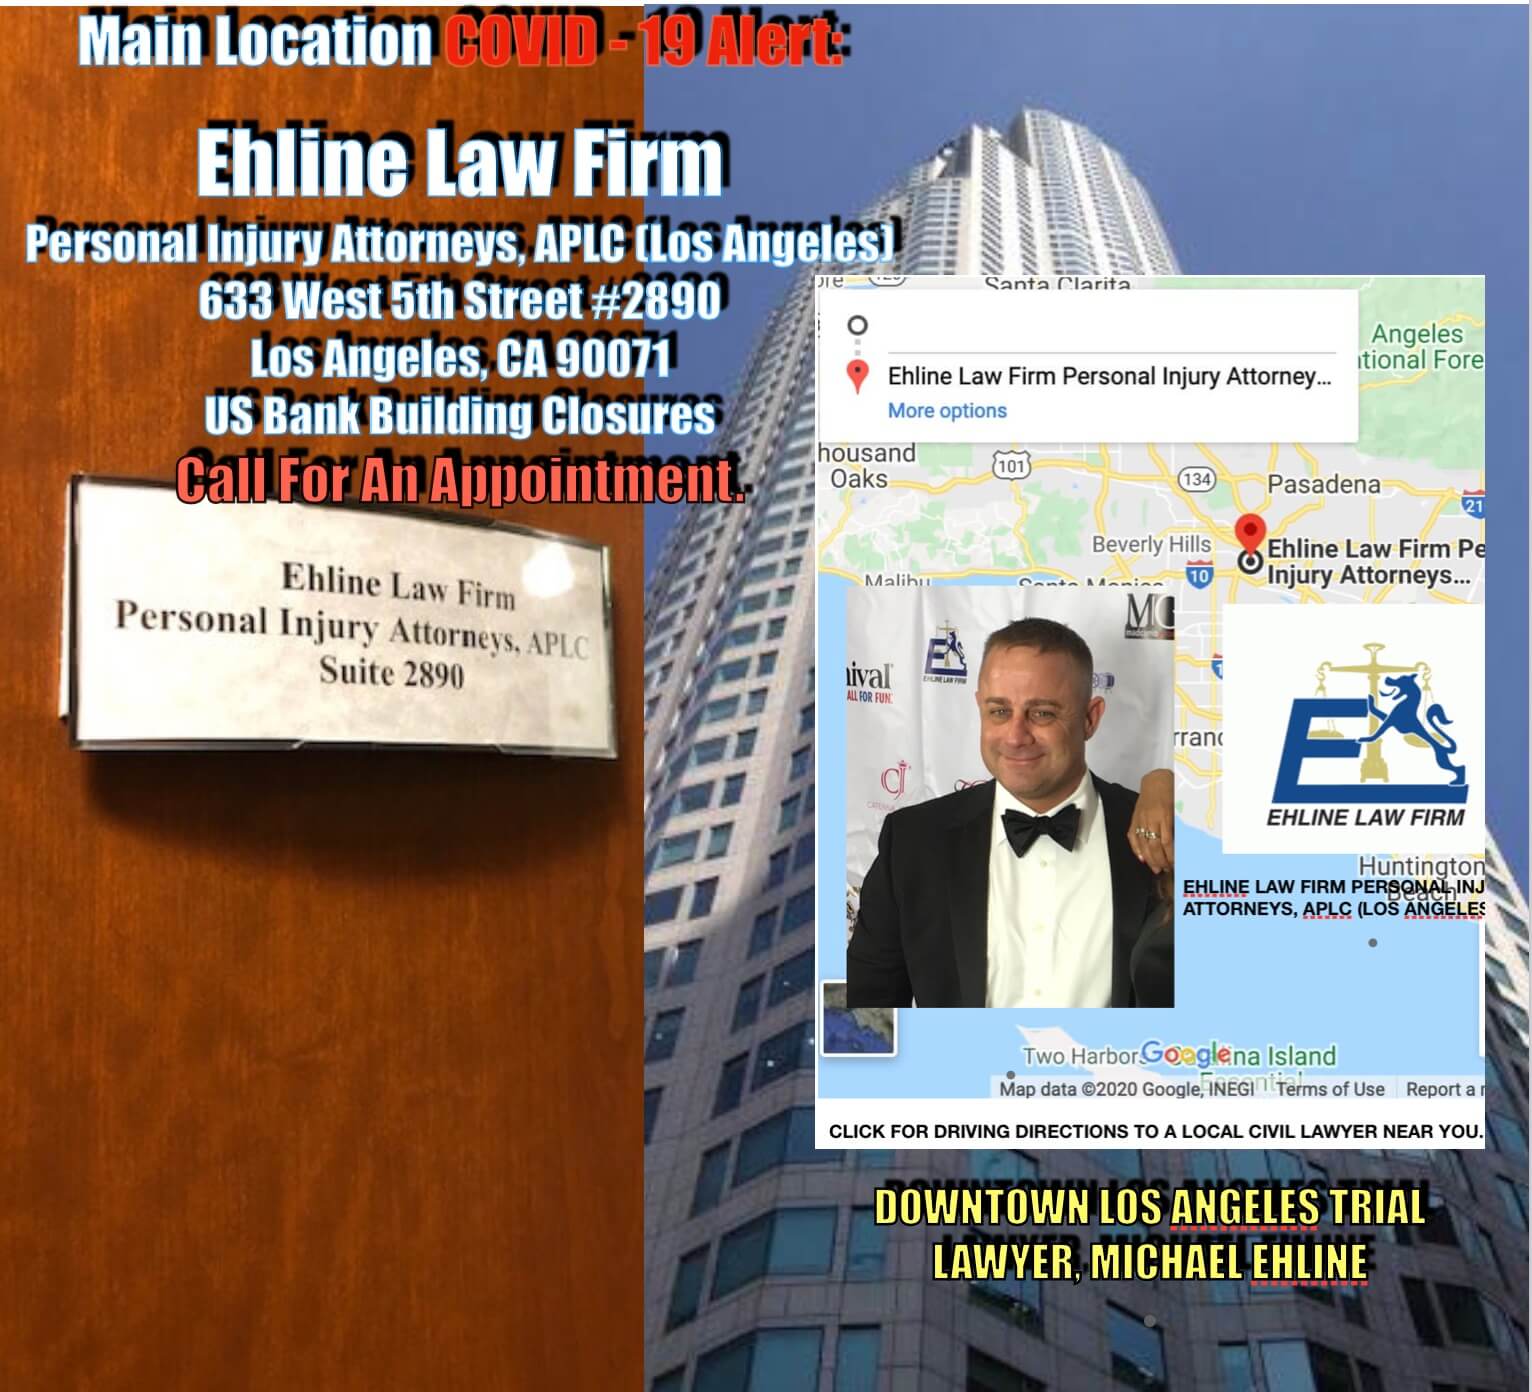 Los Angeles Personal Injury Attorneys California Accident Lawyer 100 Million Won Ehline Law Firm